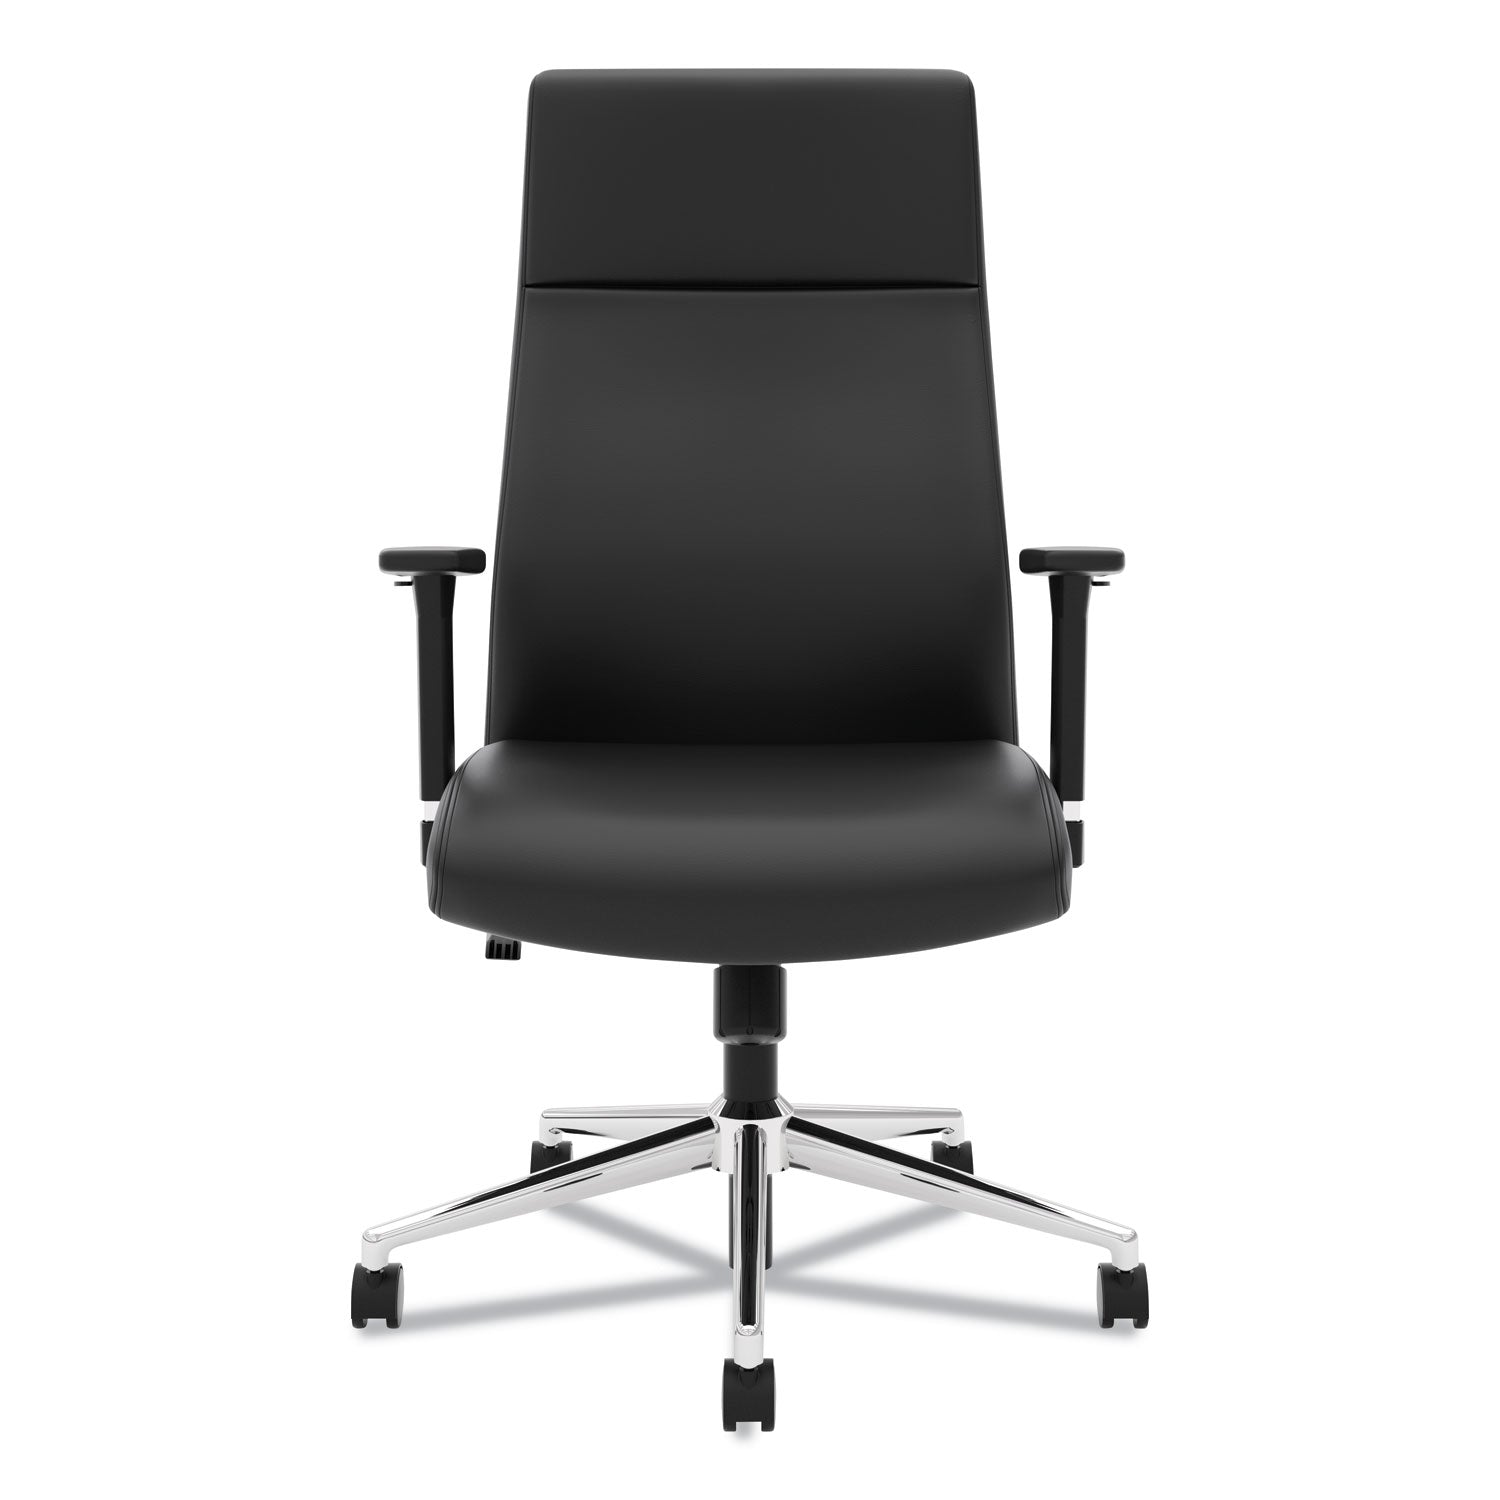 define-executive-high-back-leather-chair-supports-250-lb-17-to-21-seat-height-black-seat-back-polished-chrome-base_bsxvl108sb11 - 2